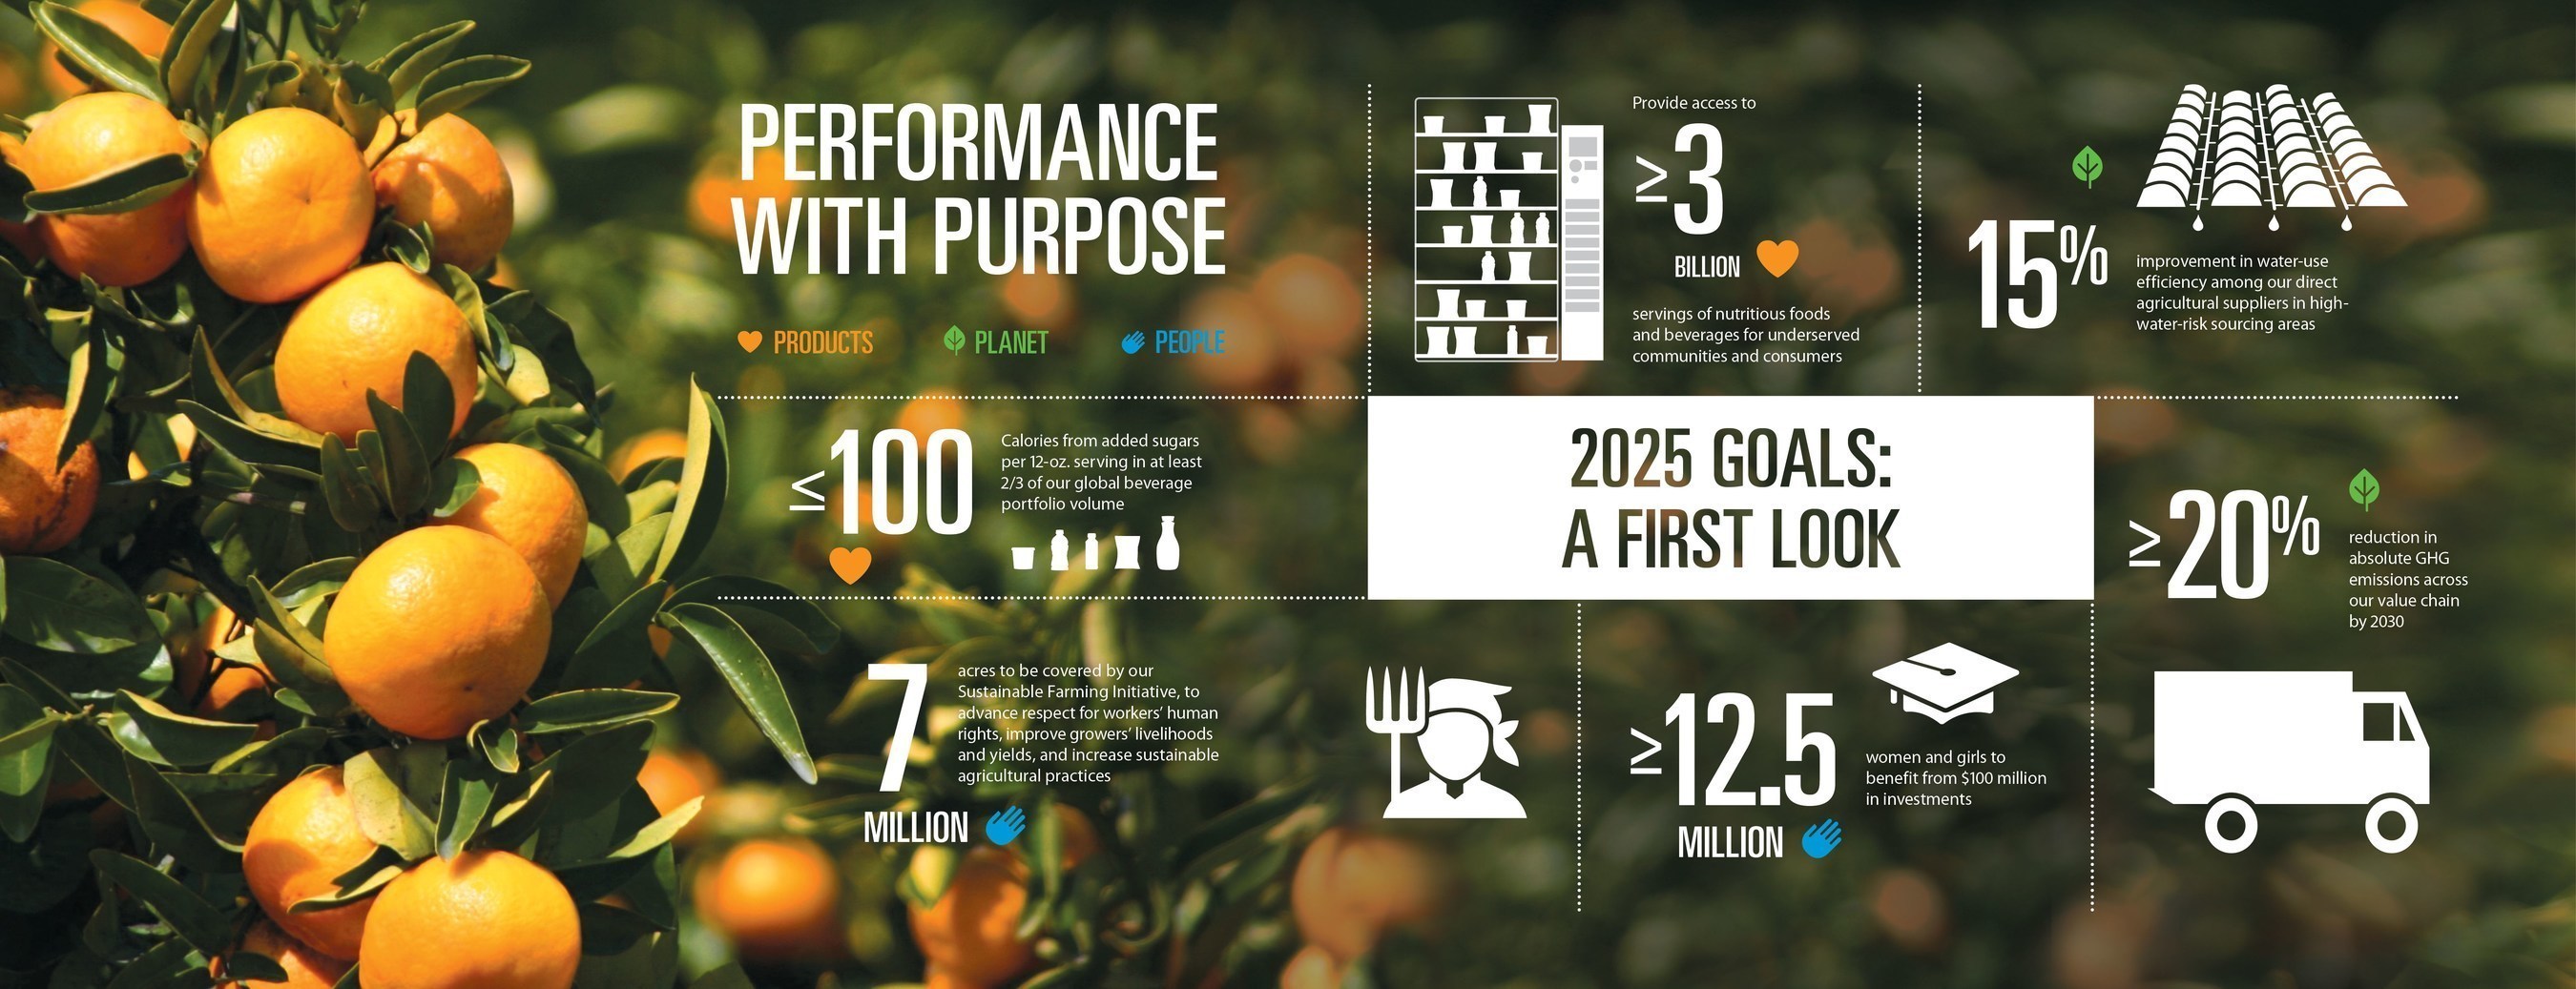 A first look at PepsiCo's 2025 sustainability goals (PRNewsFoto/PepsiCo)